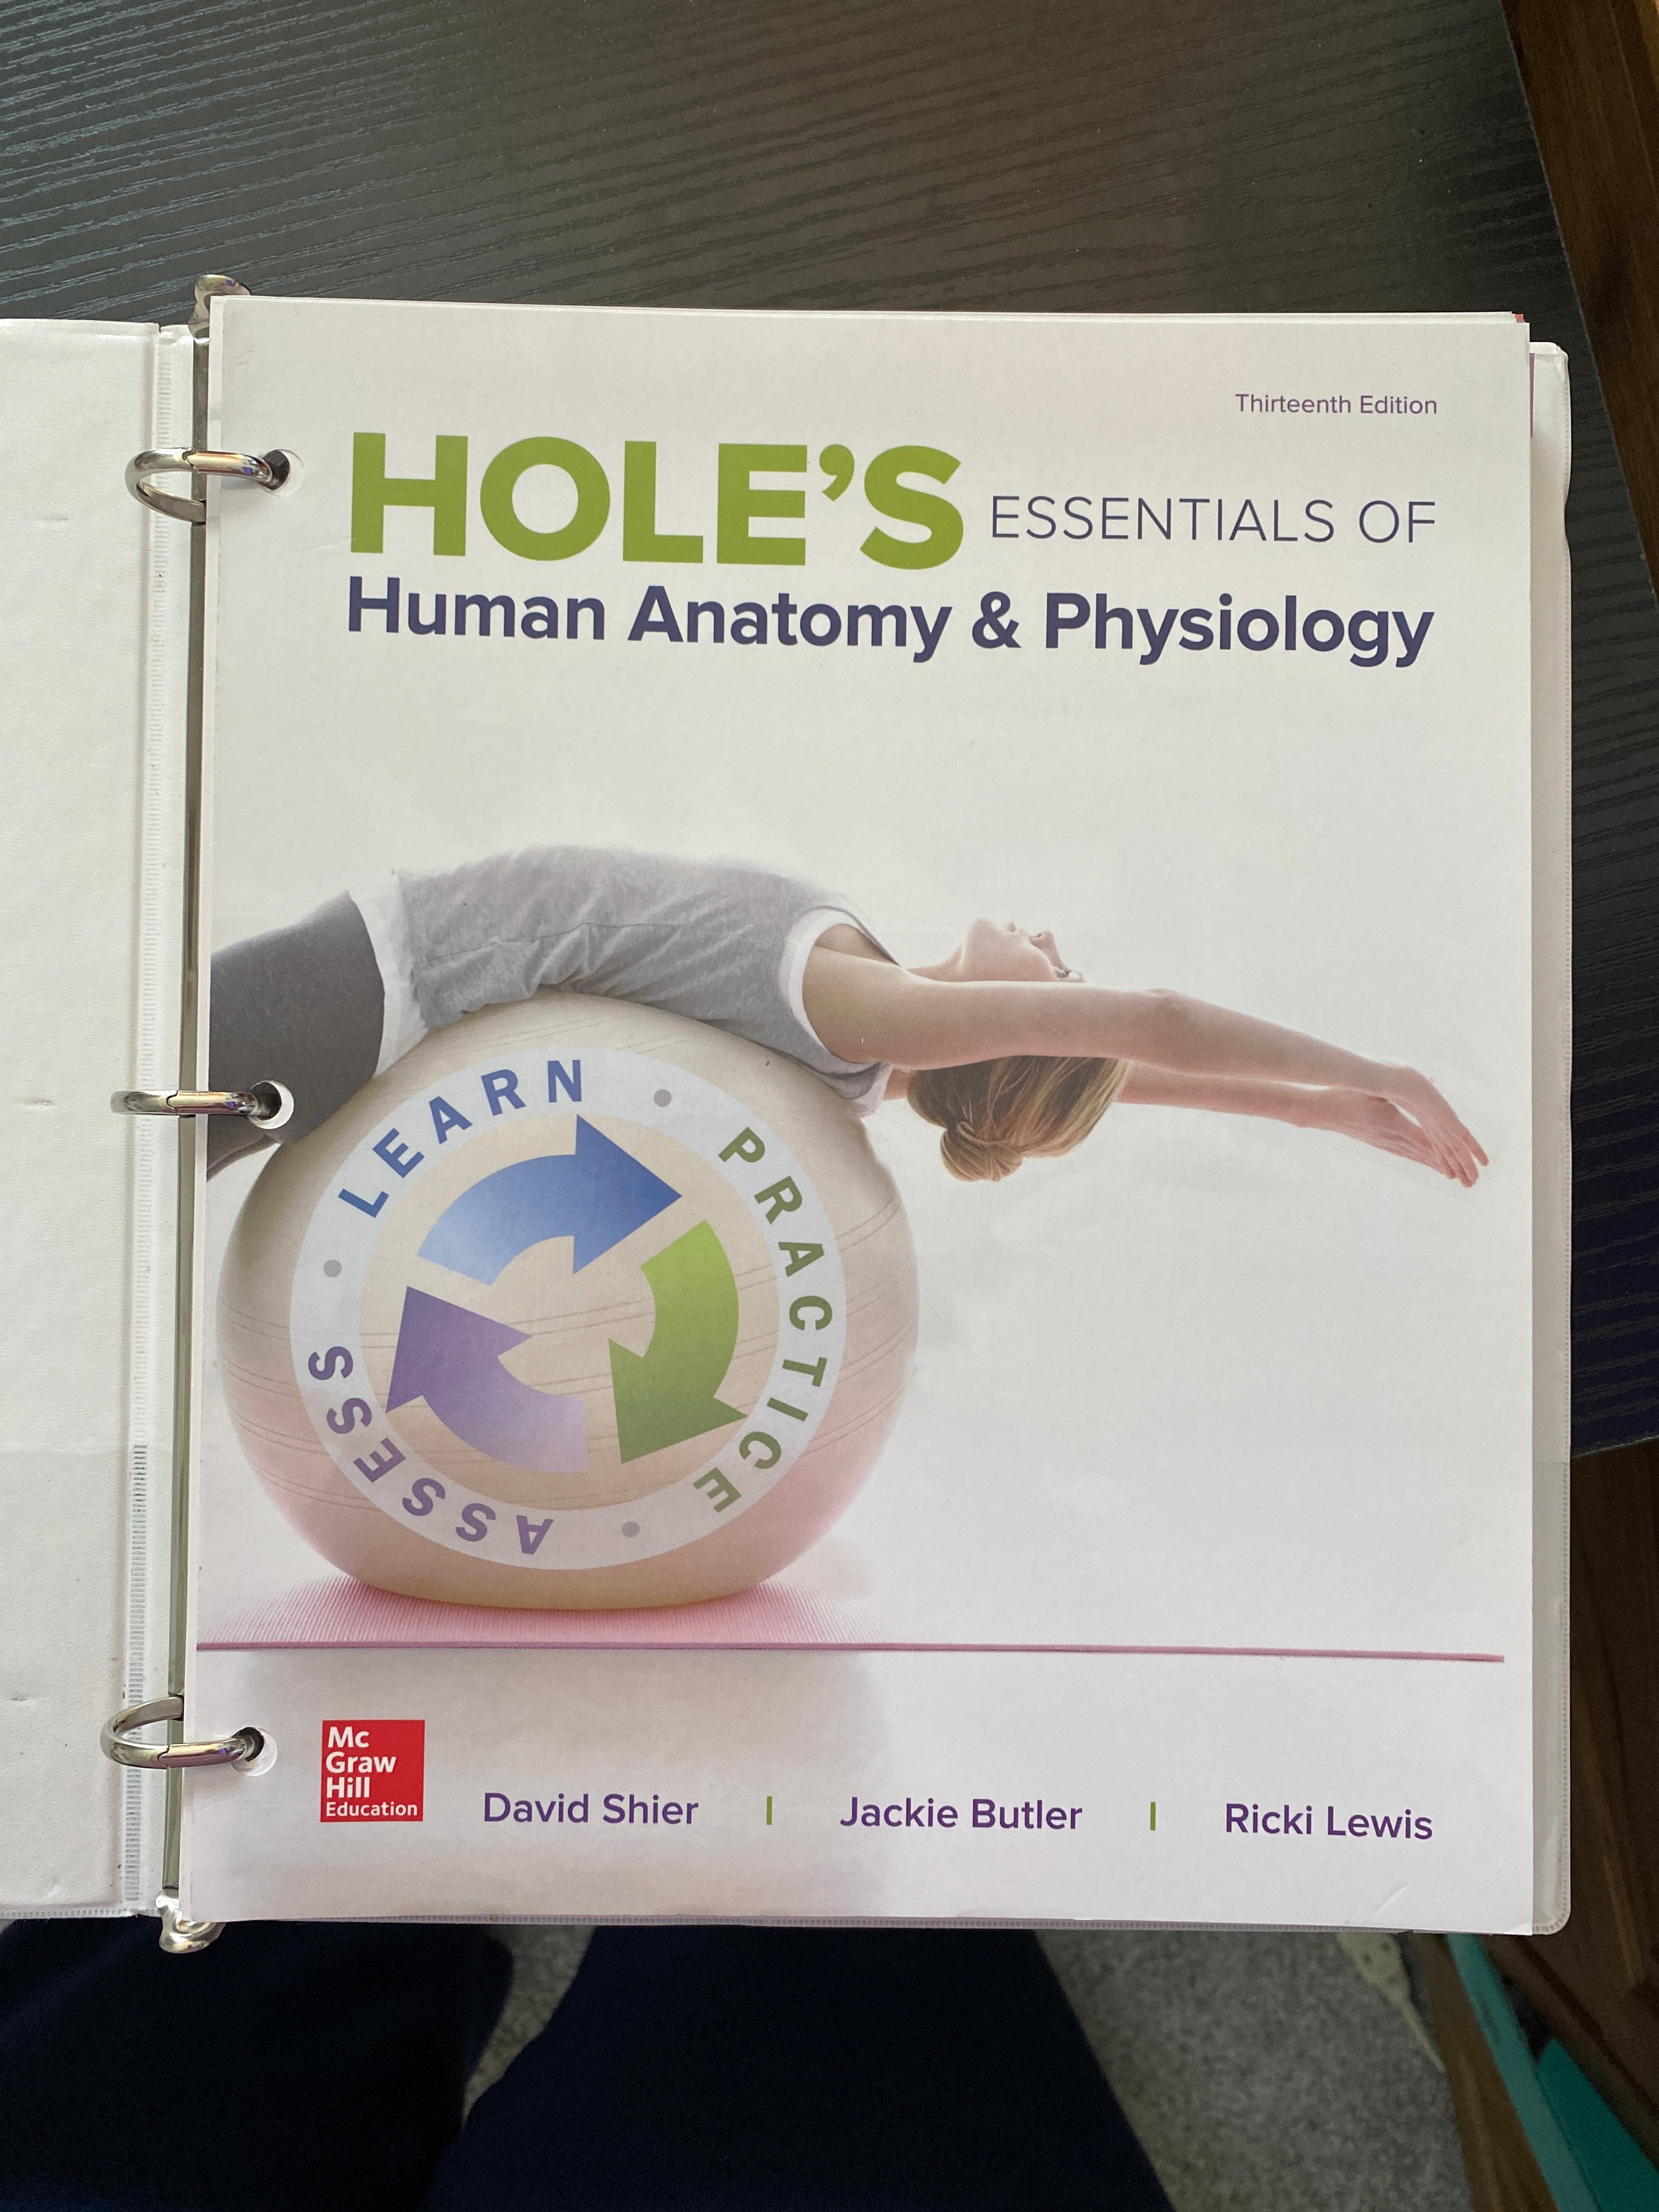 Jackie　Paperback　Ricki　N.　Hole,,　for　Physiology　Human　W.　by　John　Leaf　David　Lewis;　Butler;　L.　Shier;　Pangobooks　Essentials　Holes　Loose　Anatomy